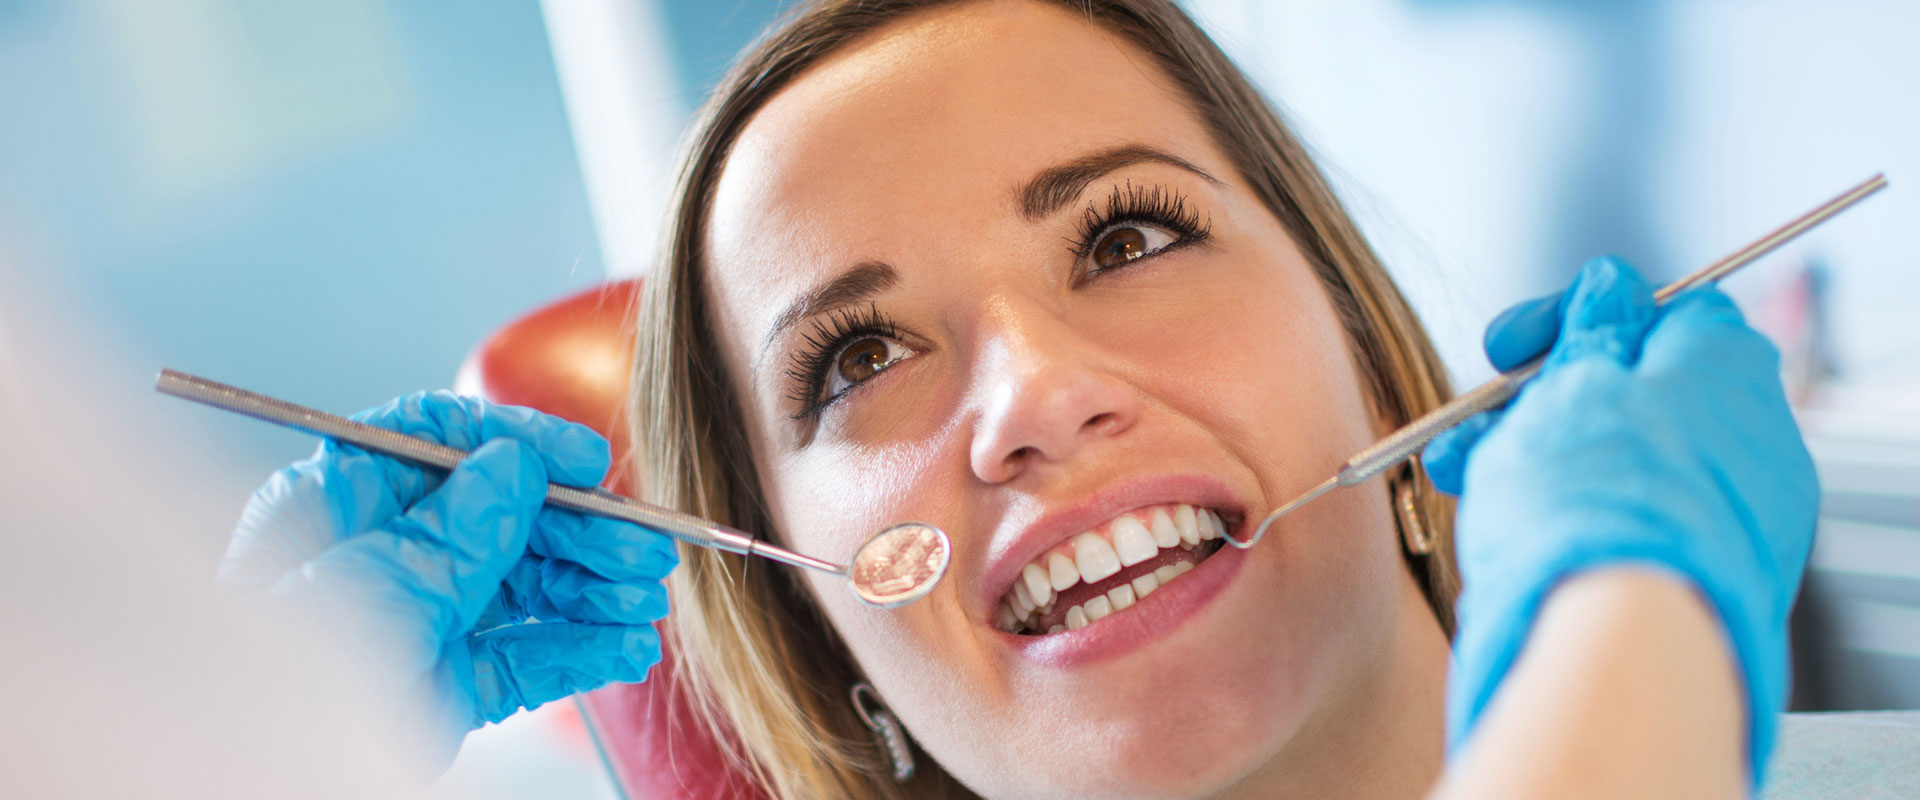 Dentist getting ready to examine patient teeth